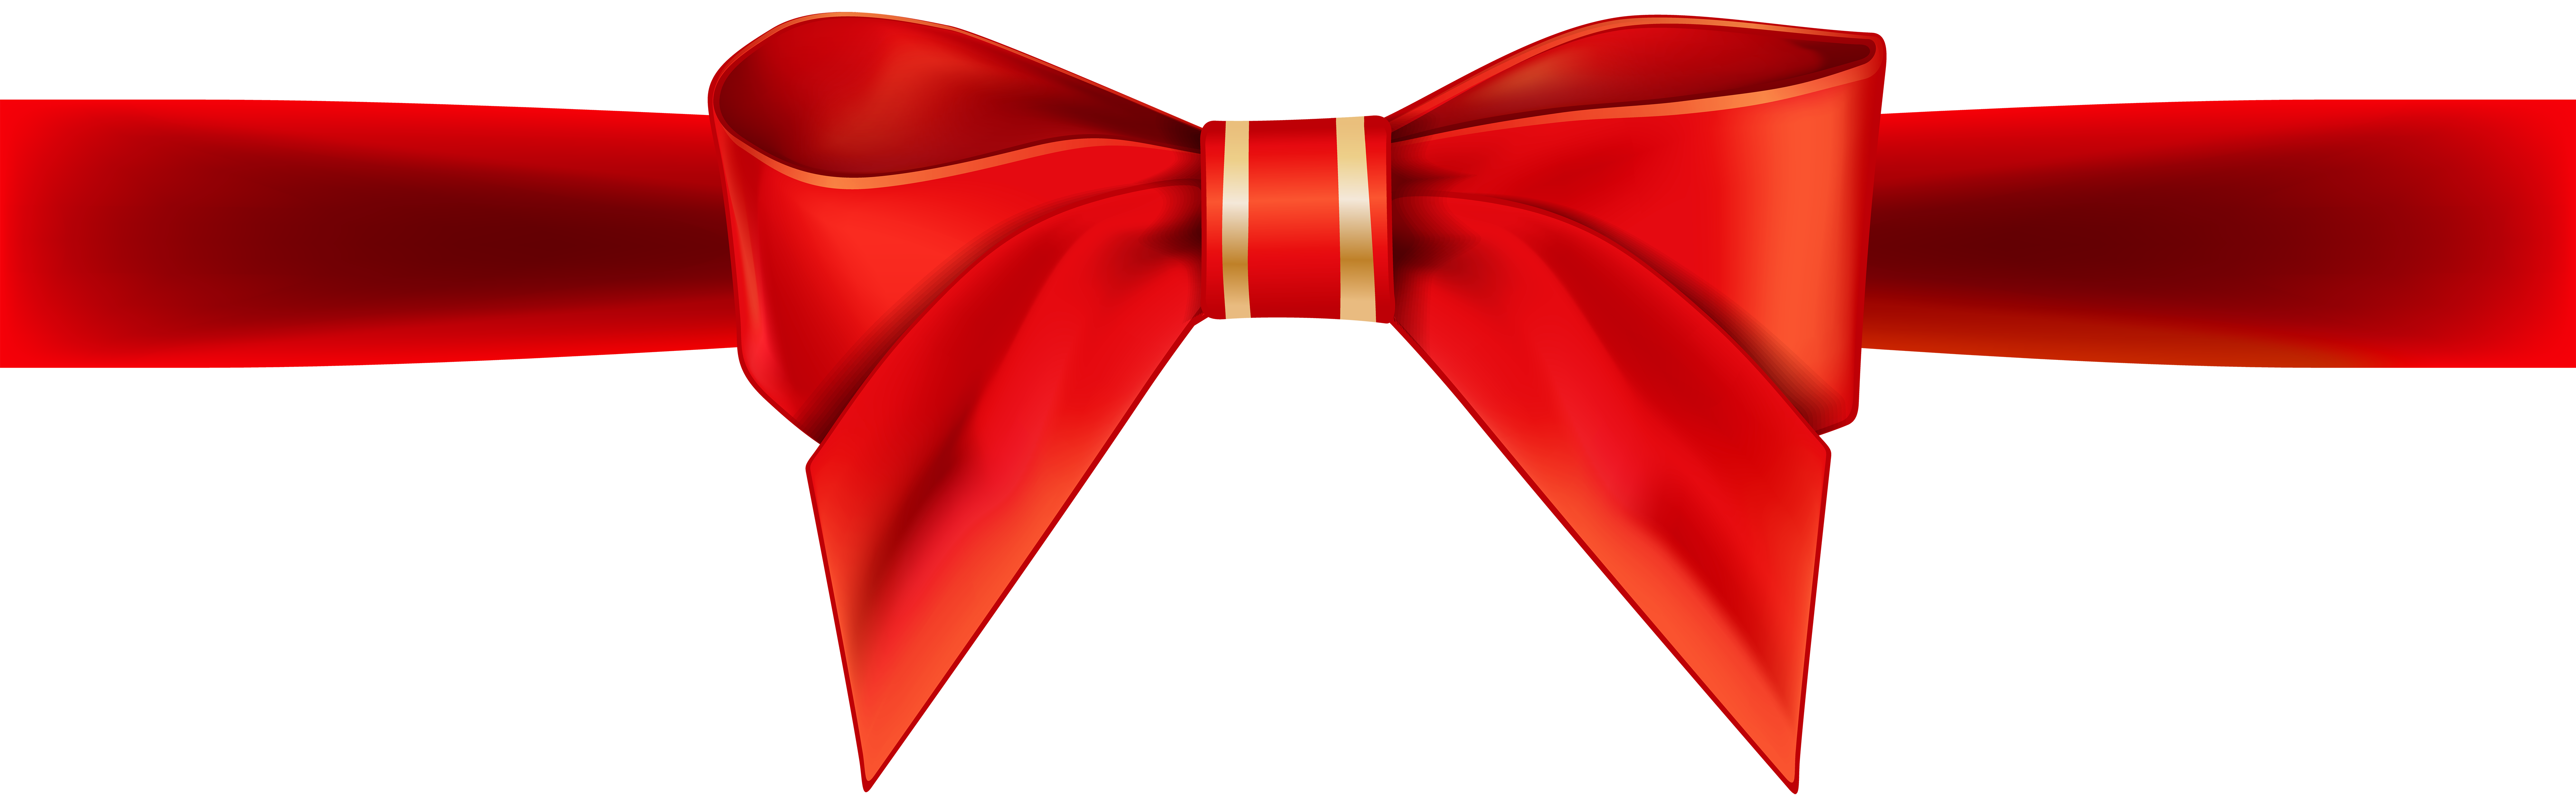 Red Ribbon Bow Transparent PNG Clip Art Image